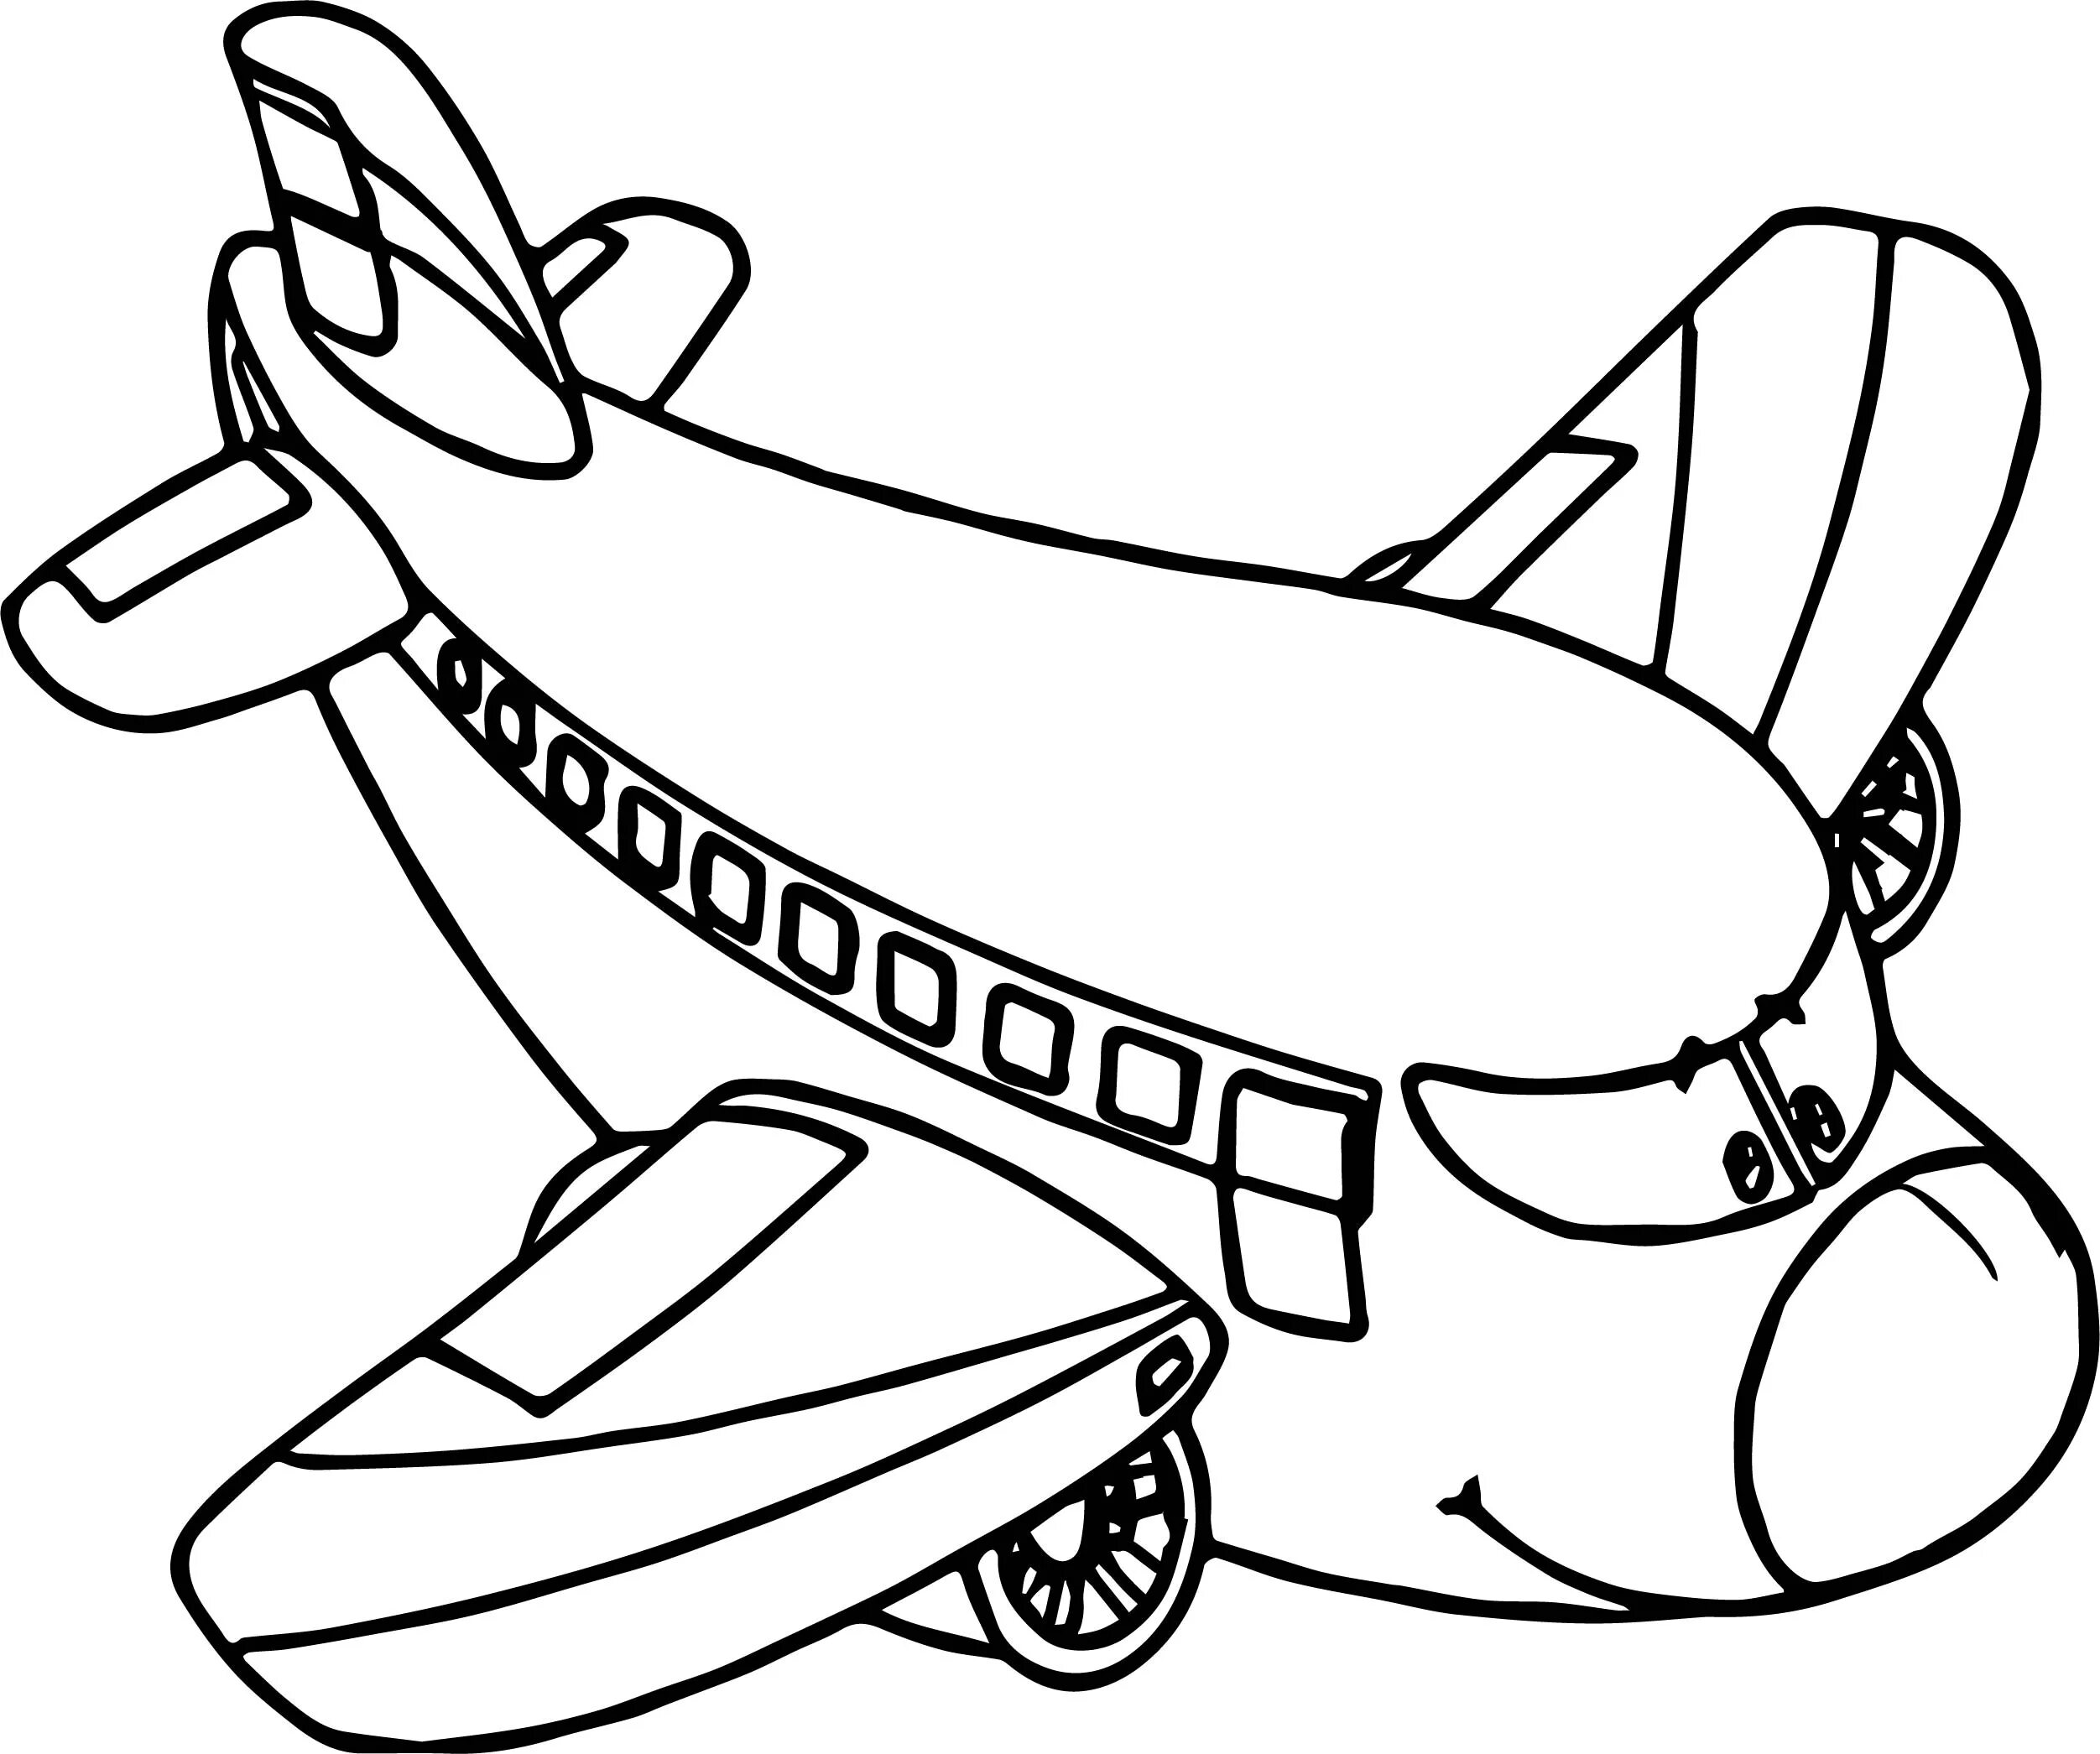 Cute plane coloring for kids